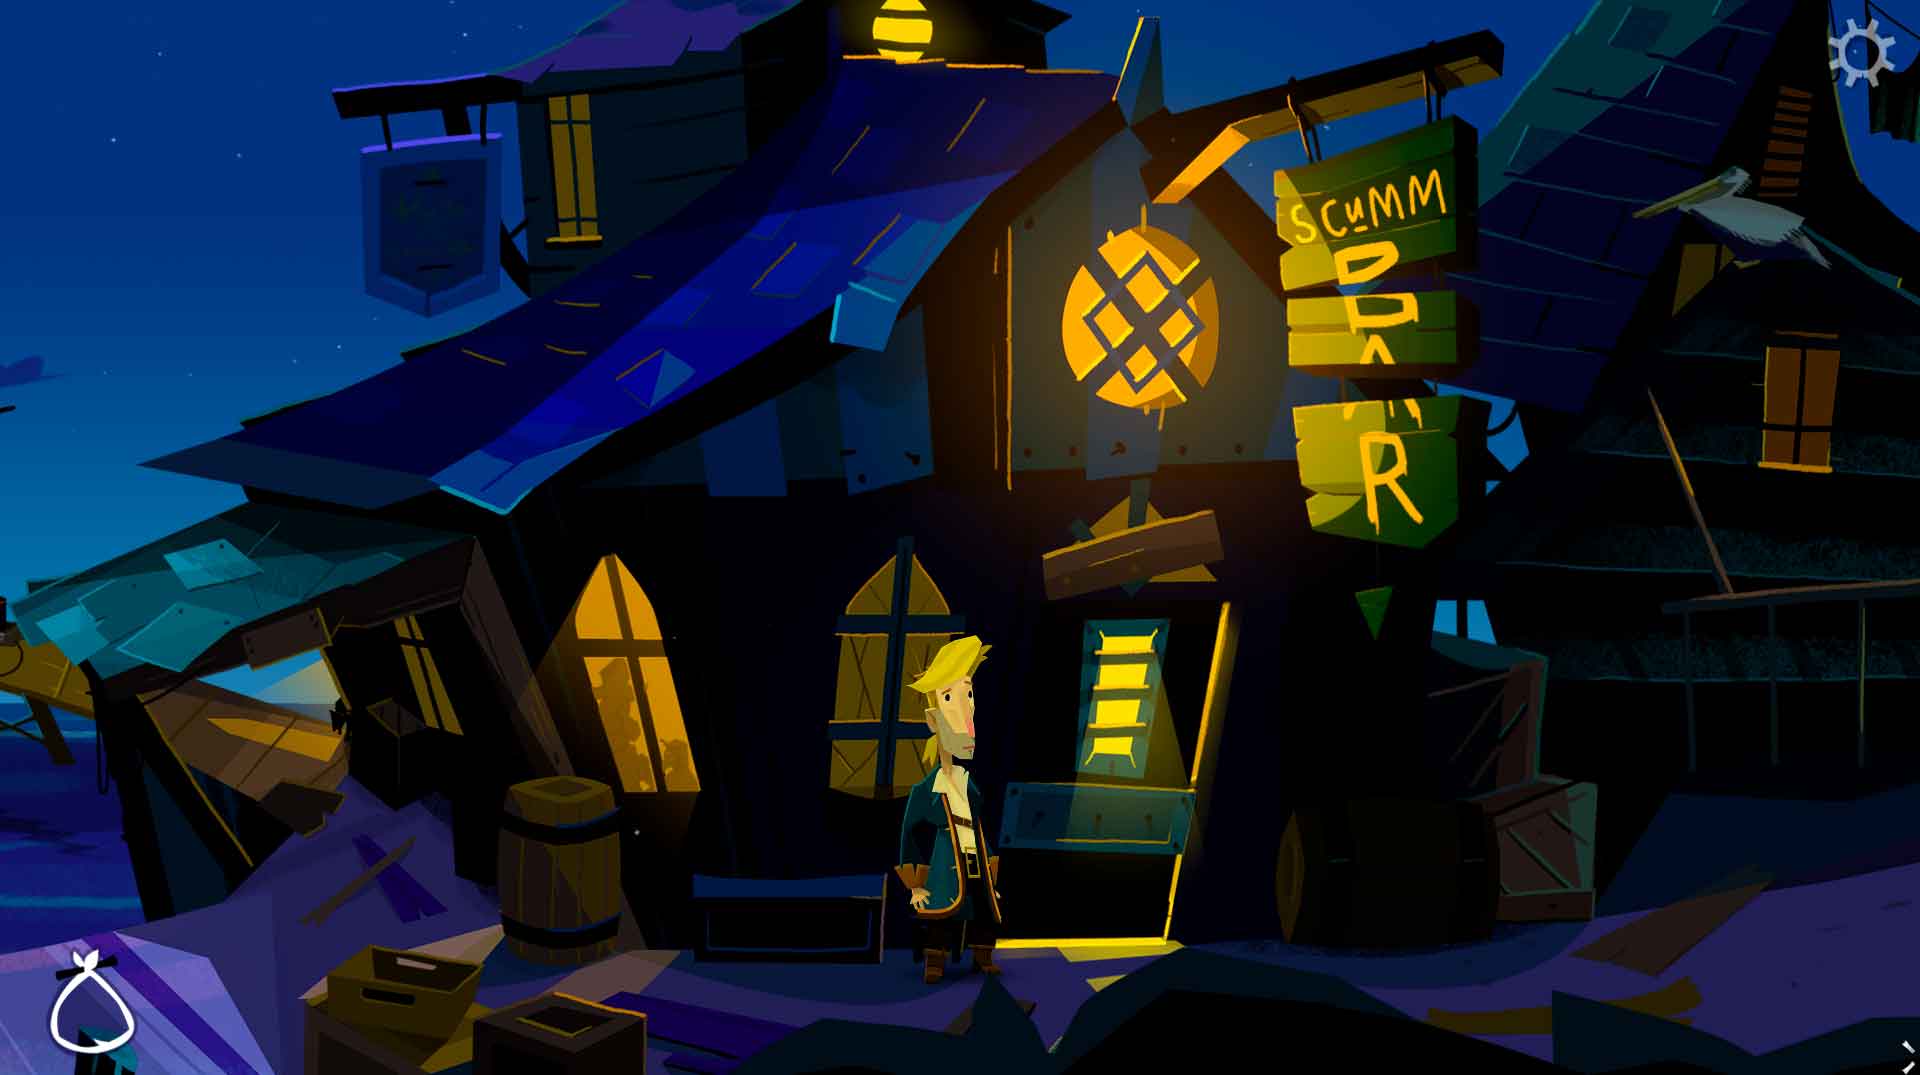 Analysis: Return to Monkey Island is coming home